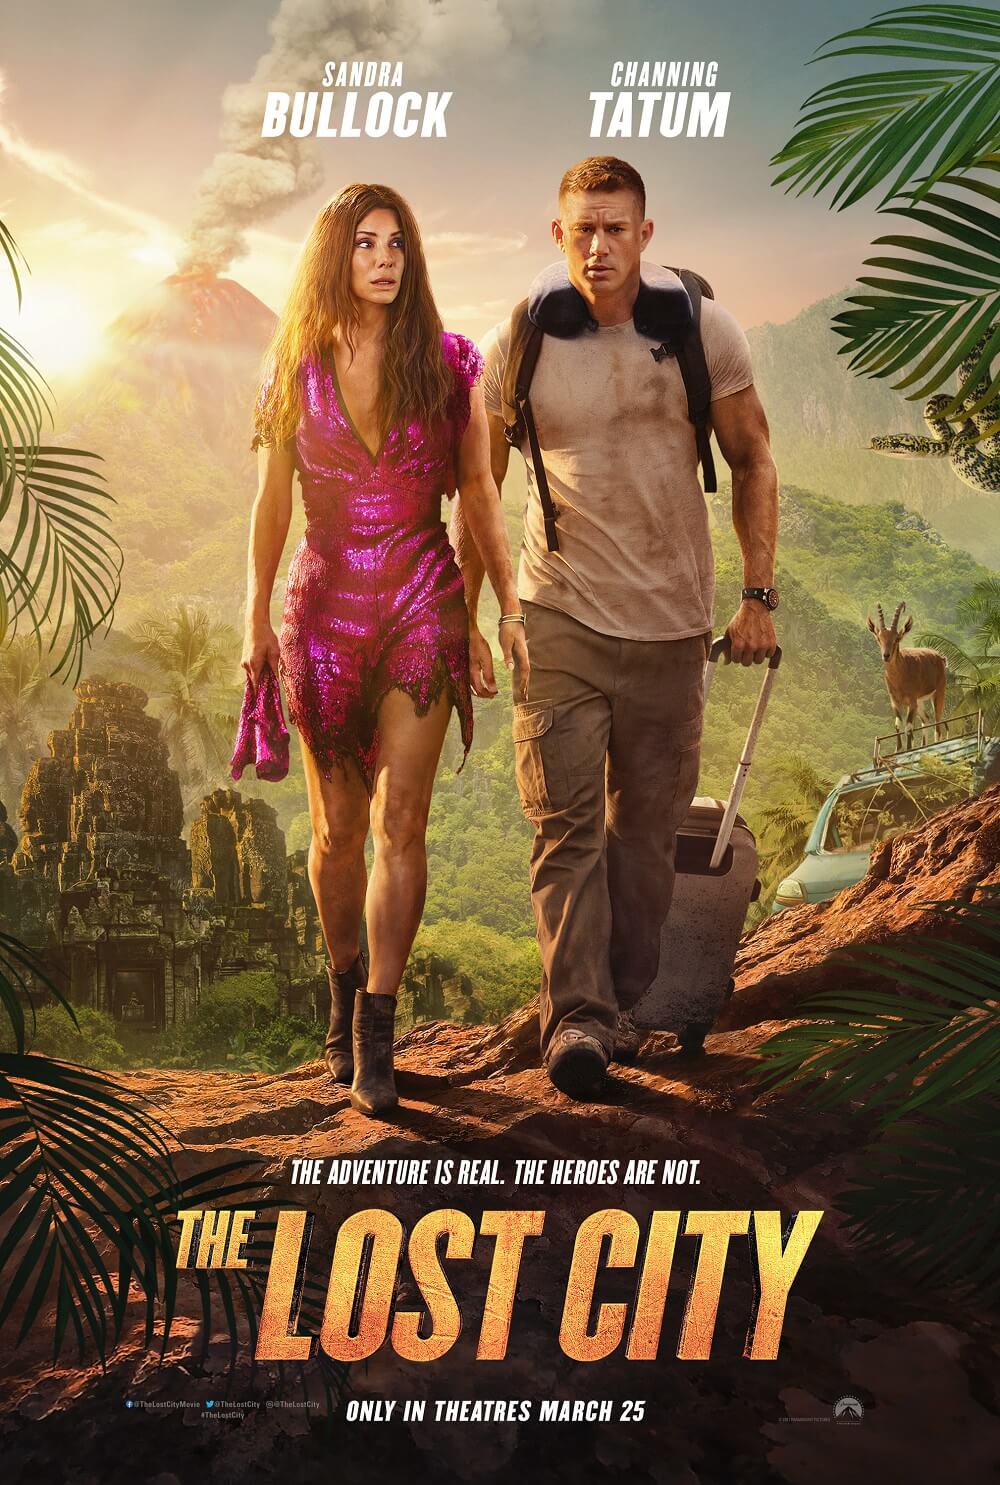 'The Lost City' review: A romantic-adventure action movie that subverts old rules